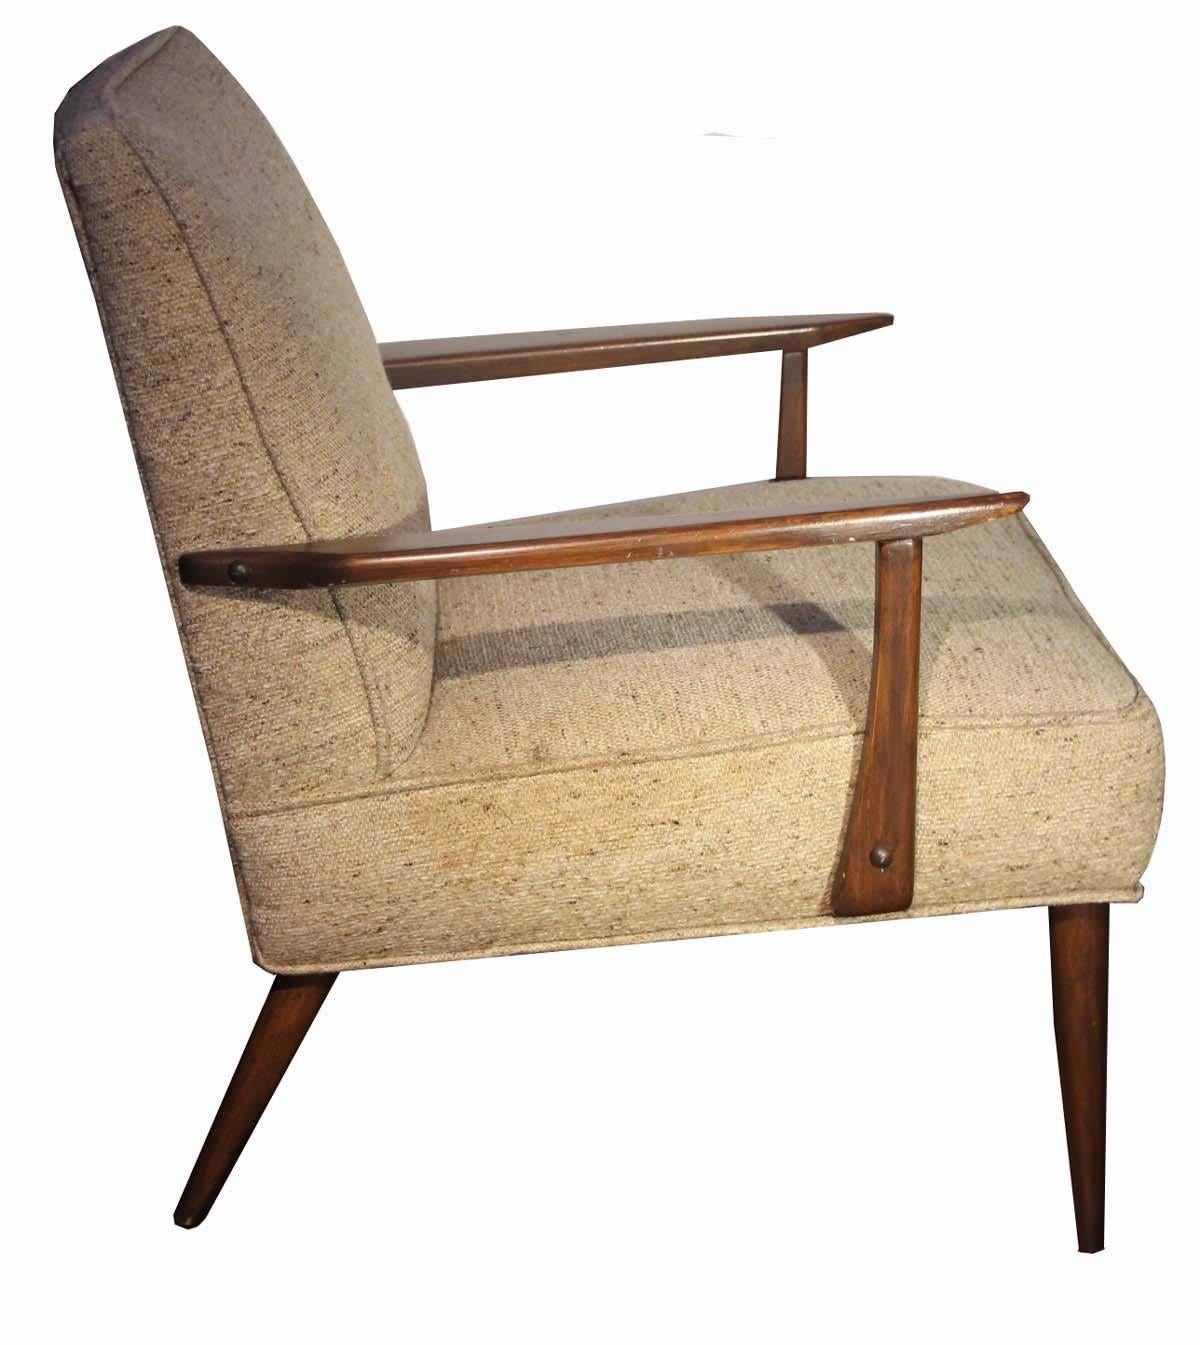 Great condition, these chairs have incredible lines with a beautiful patina on the wood. Solid as the day constructed the uph has been updated and in perfect condition. The lines say it all, pics are accurate depiction of these wonderful chairs.